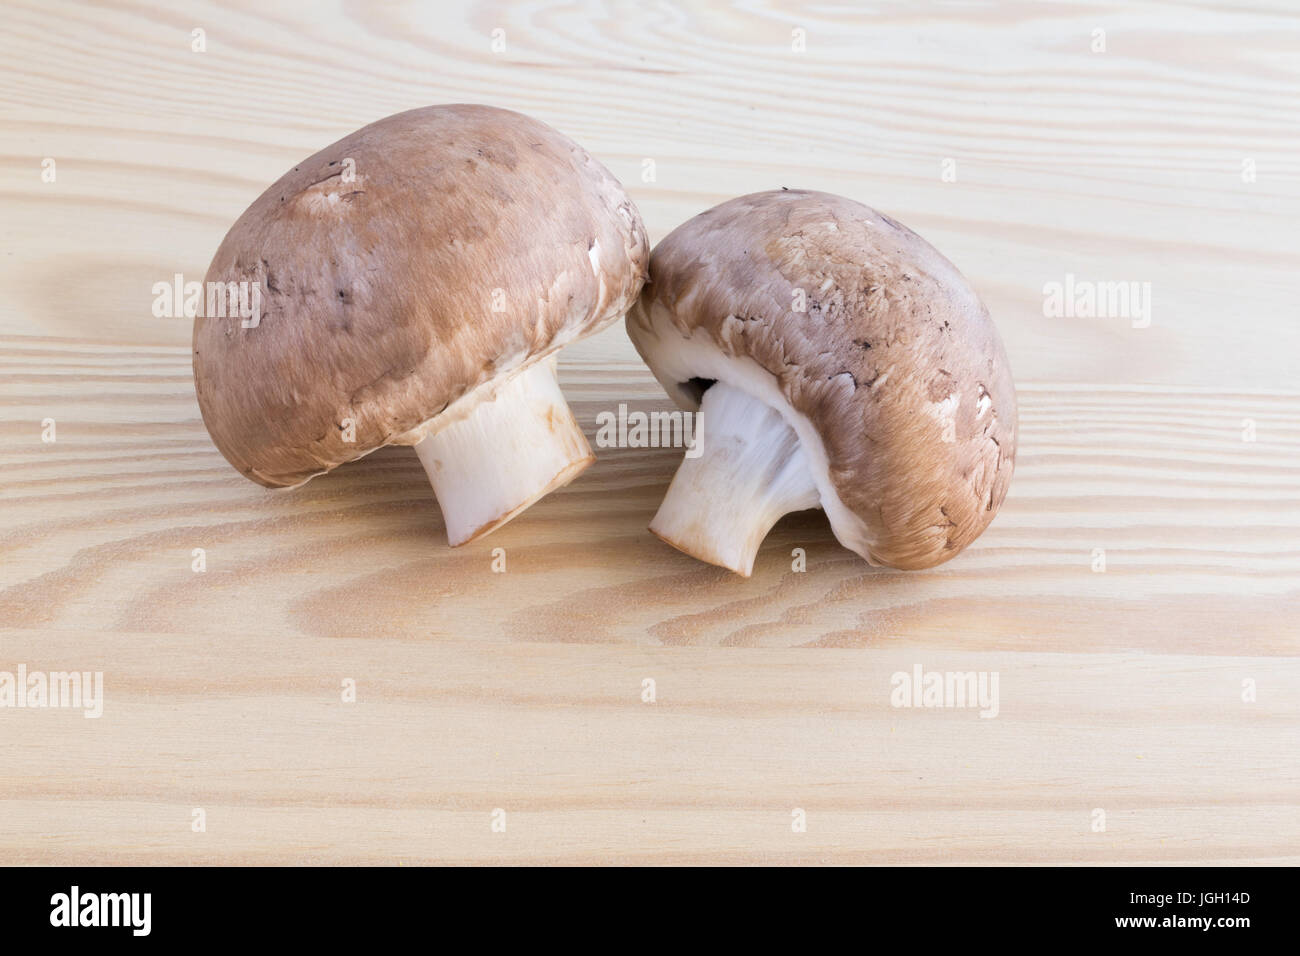 Two chestnut mushrooms on a wooden cutting board Stock Photo